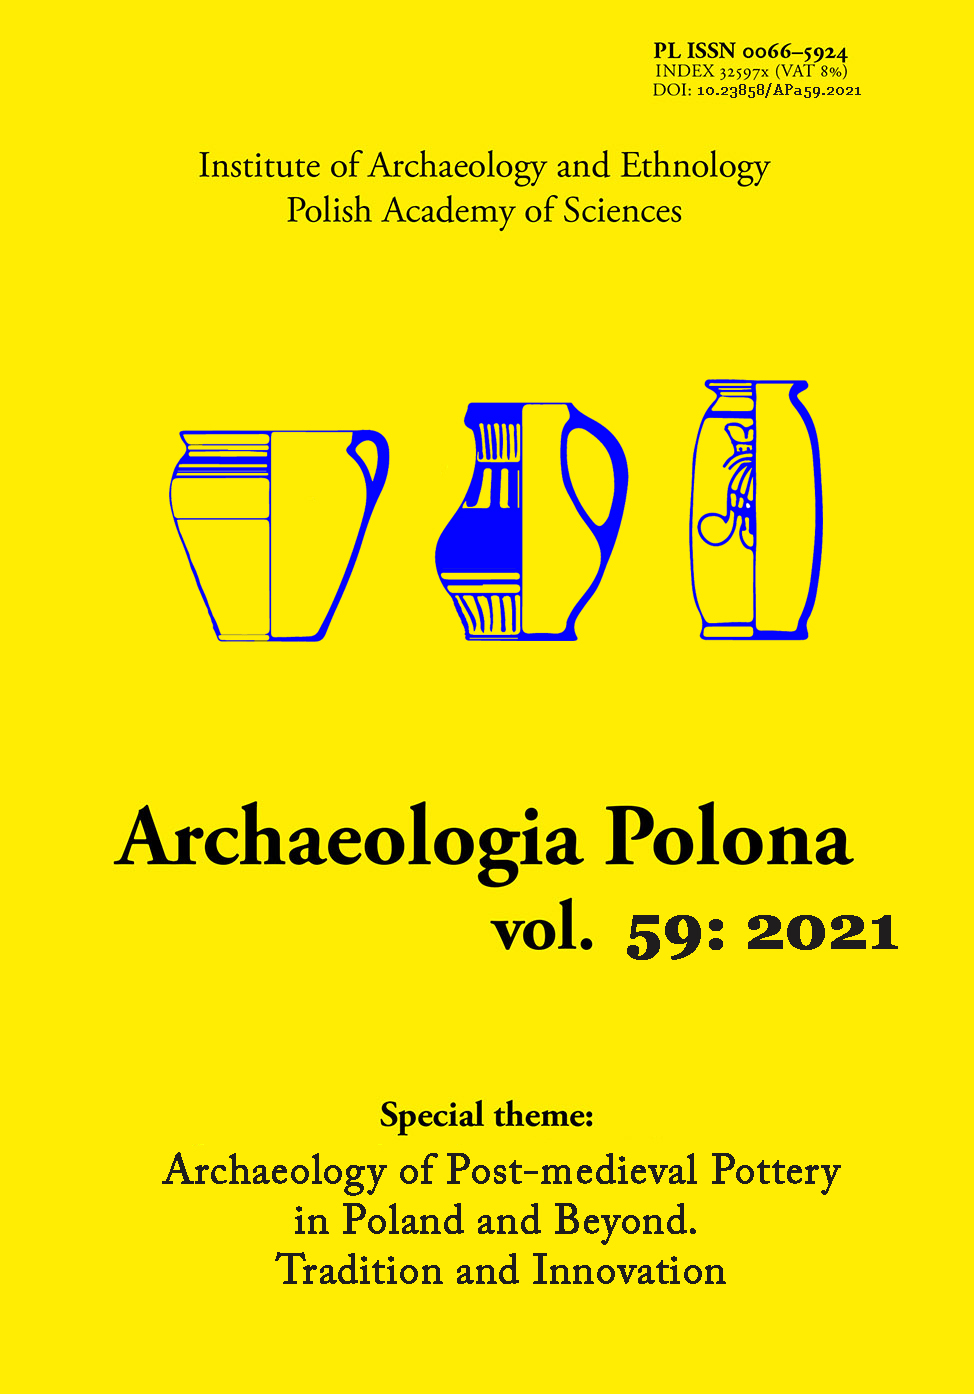 					View Vol. 59 (2021): Archaeology of Post-Medieval Pottery in Poland and Beyond. Tradition and Innovation
				